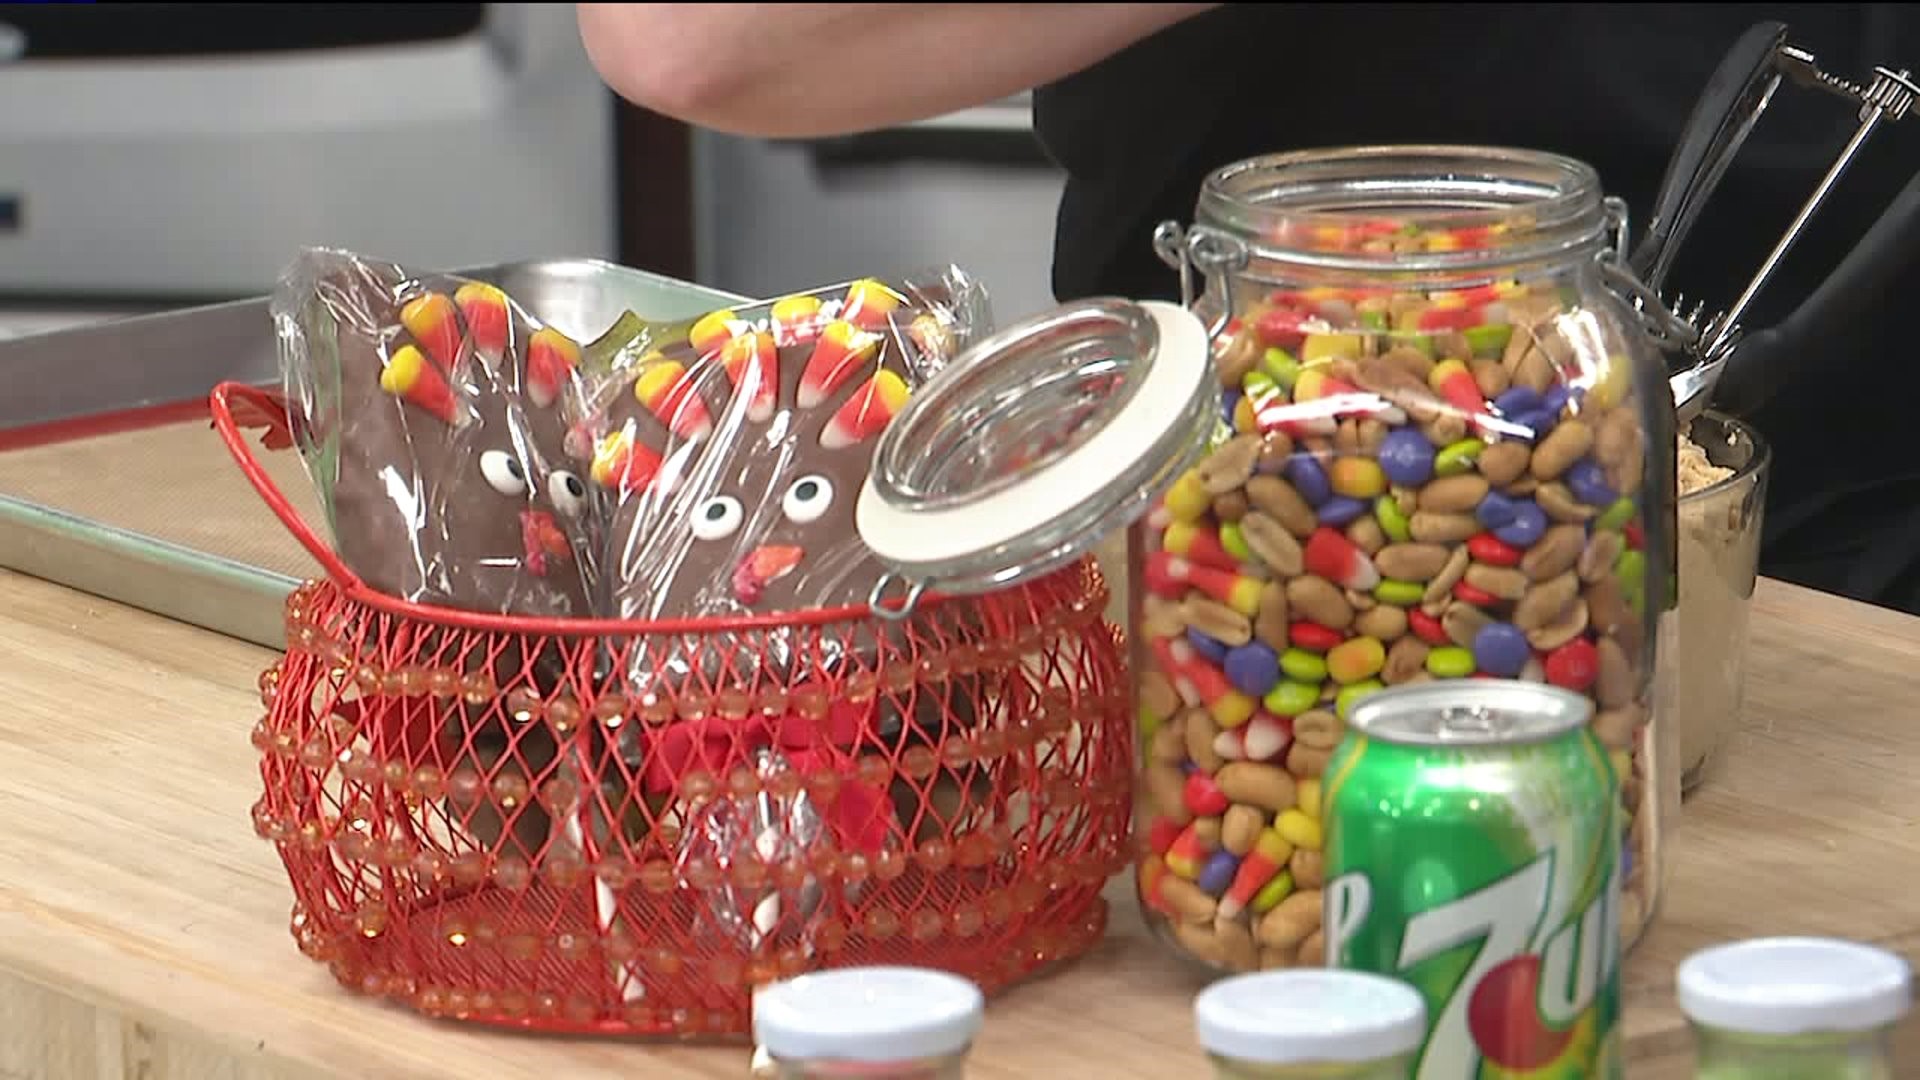 NAILED IT OR FAILED IT: Special Guest Shows Us A Creative Way To Use Up Leftover Halloween Candy